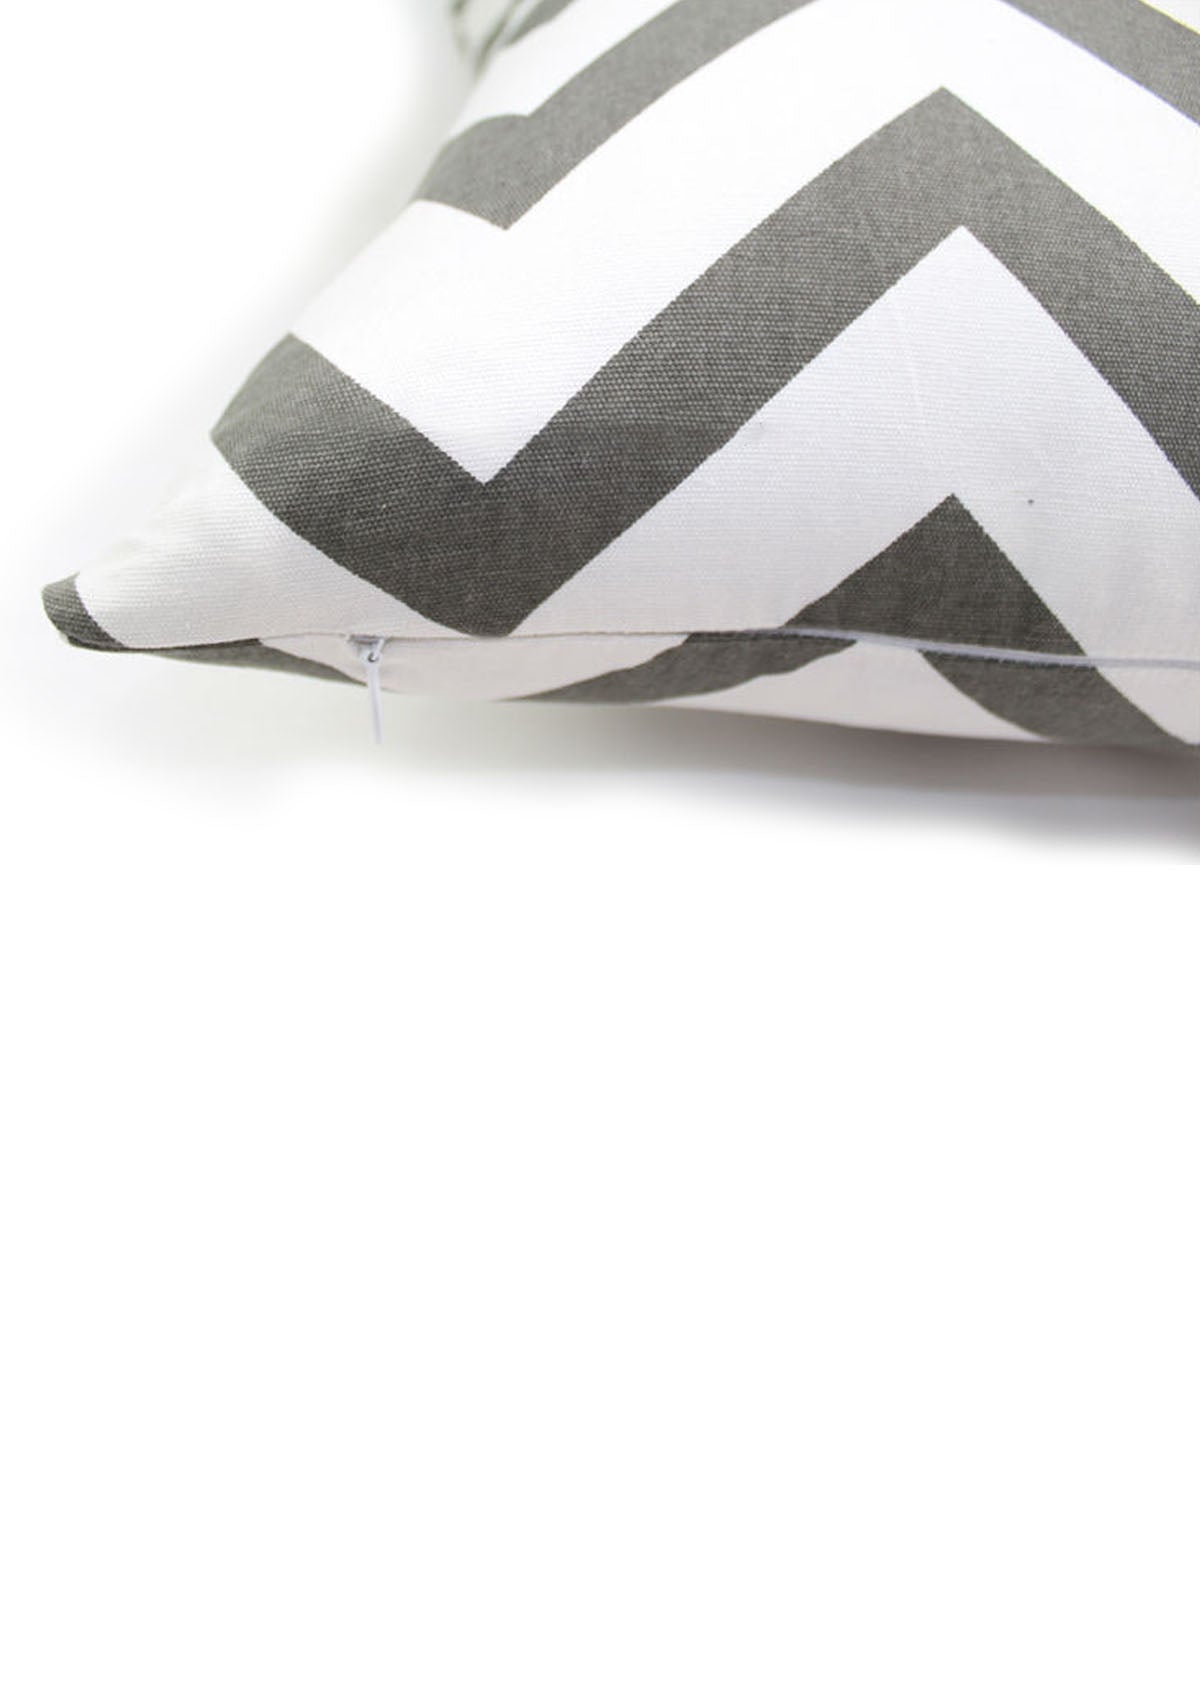 Close-up view of Elegance Harmony's grey and white zipped striped cushion cover.